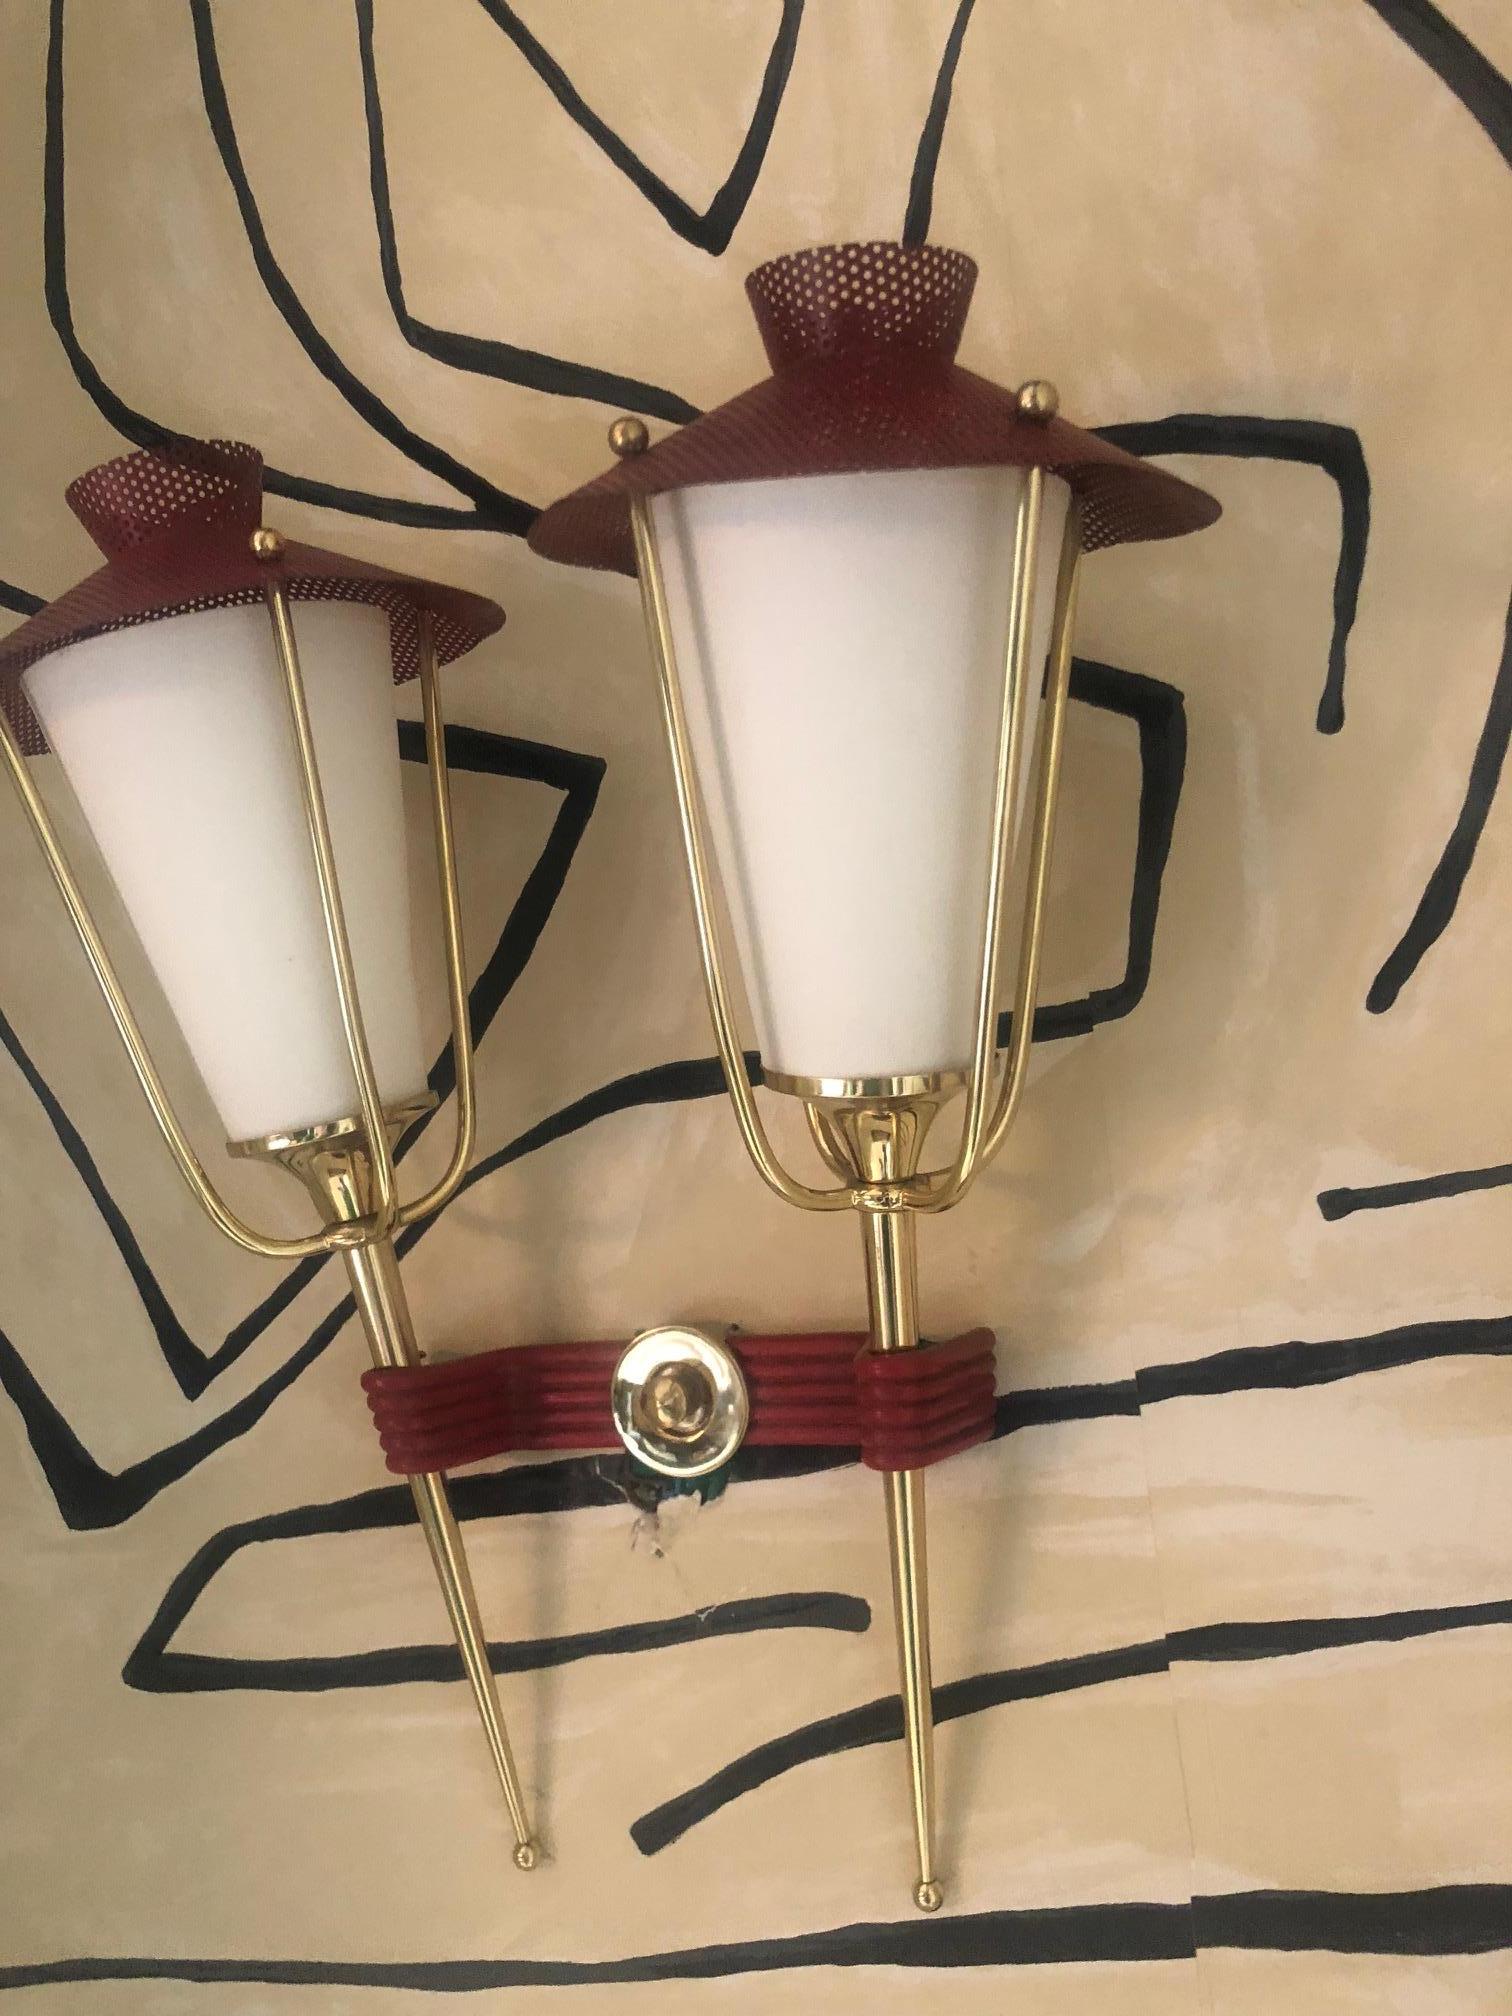 Midcentury pair of French red and brass wall sconces by Maison Arlus. Lantern shaped double wall lights with brass and red powder-coated metal hats. The paper shades emit a beautiful diffused light. Brass has been refinished.